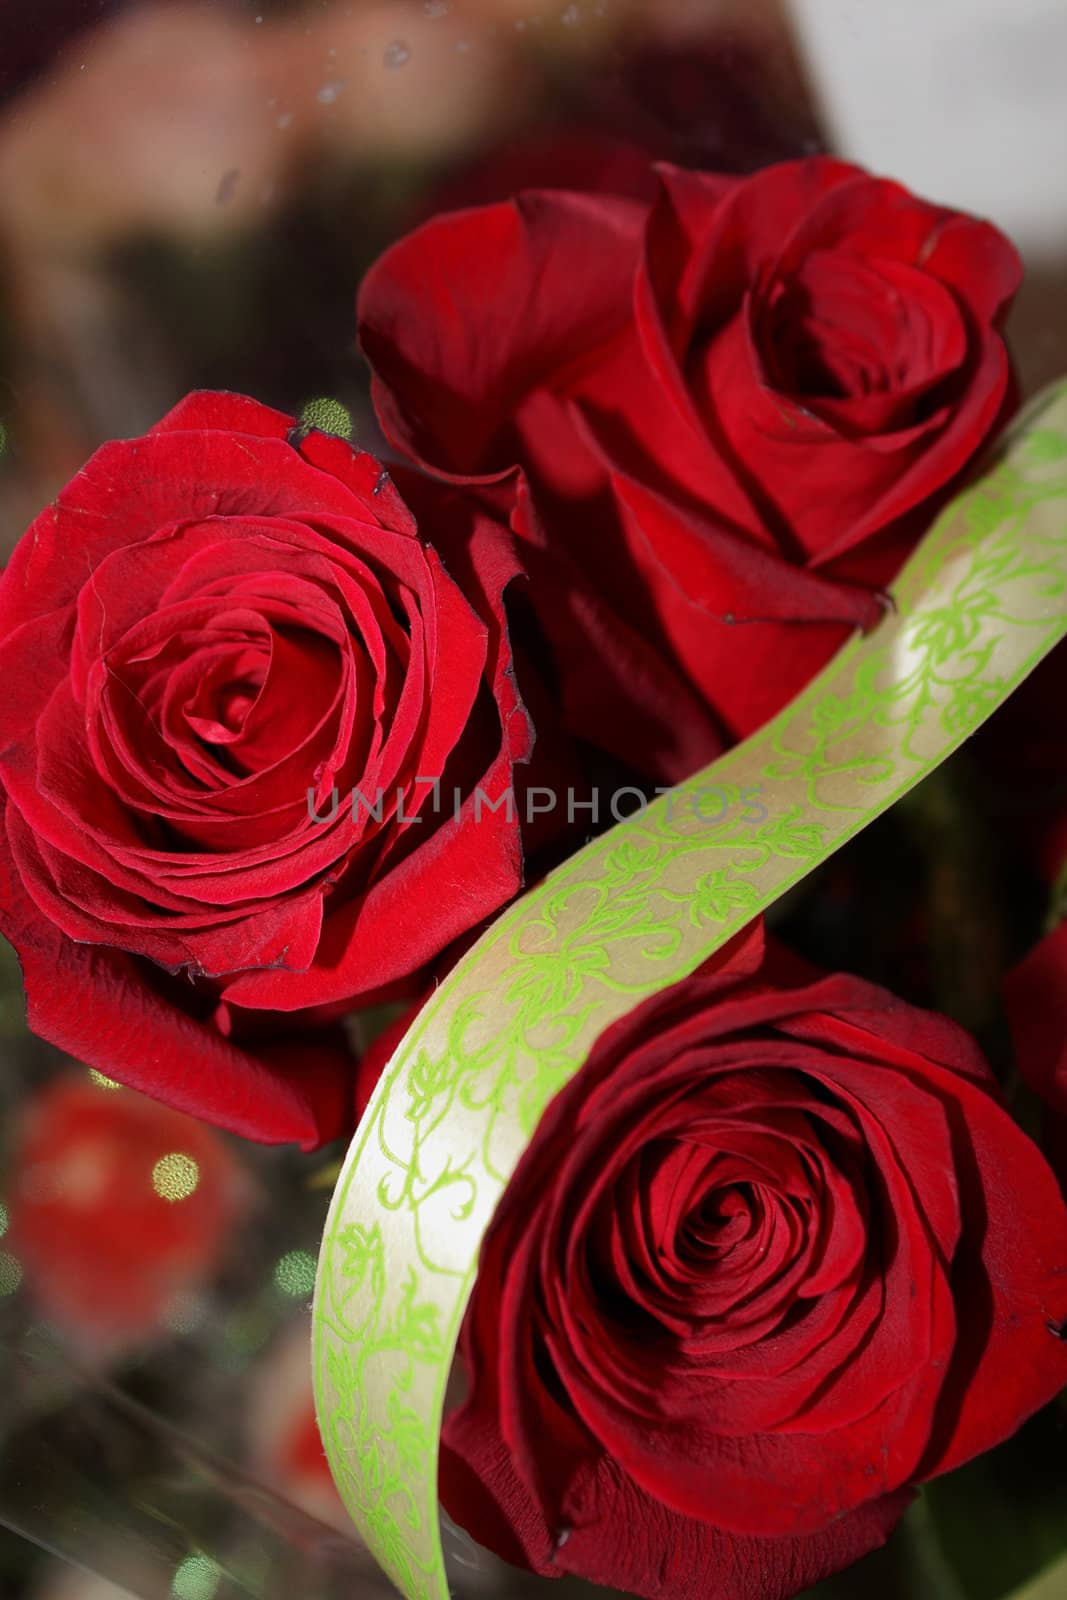 Three red roses in the wedding bouquet